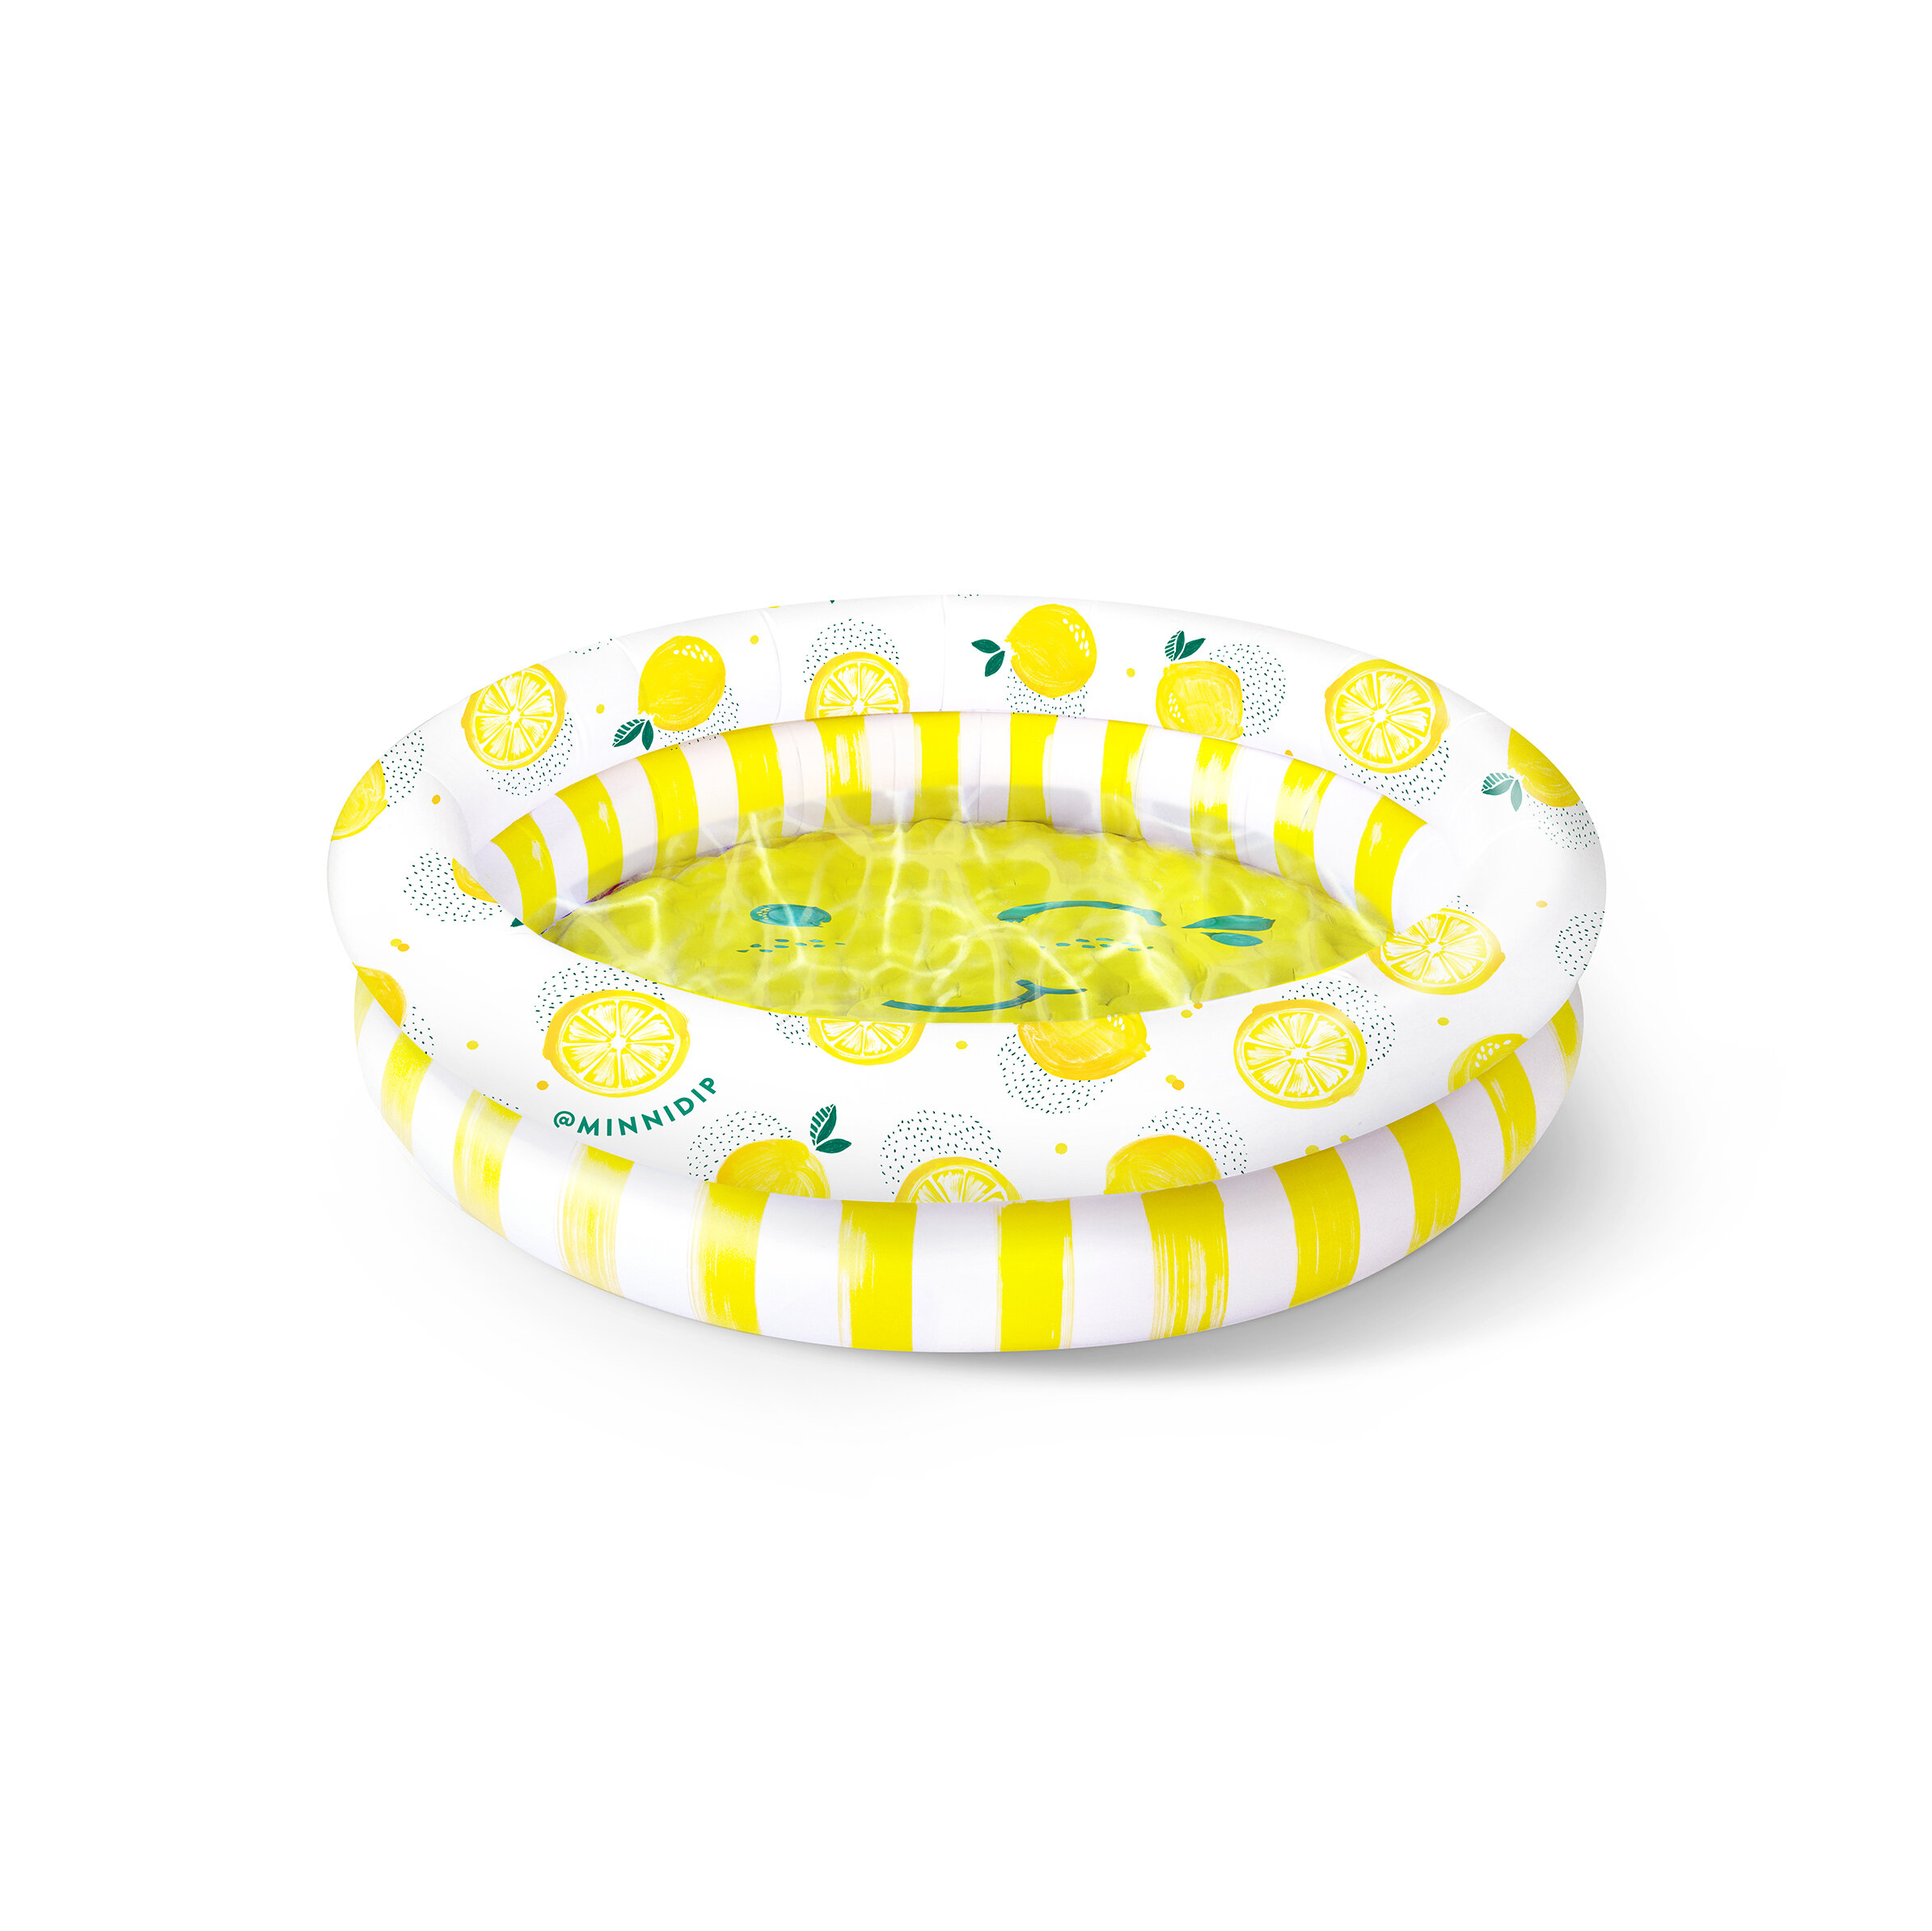 Details about   MINNIDIP SPLASH OF CITRUS Luxe Inflatable Swimming Pool Minni Minni NEW 